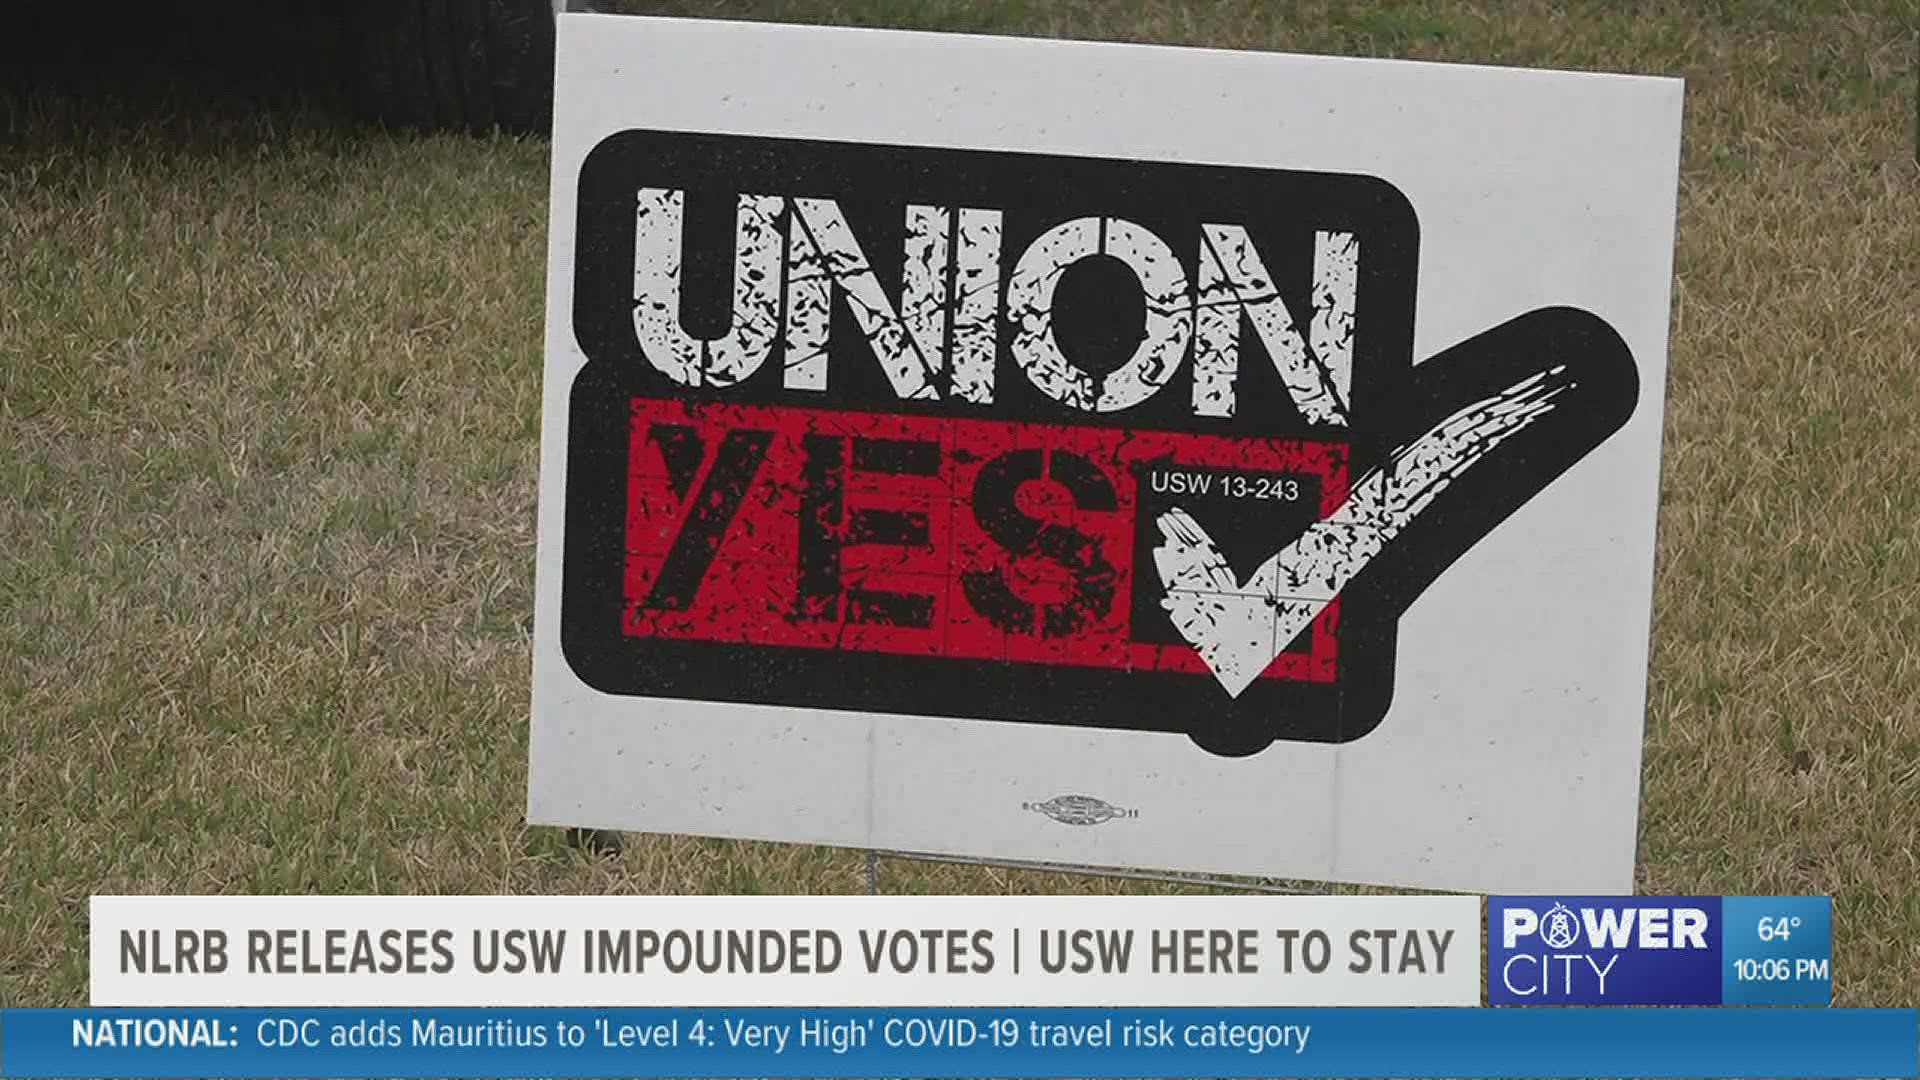 Results showed that 258 members voted in favor of being represented by the USW union and 229 voted against.